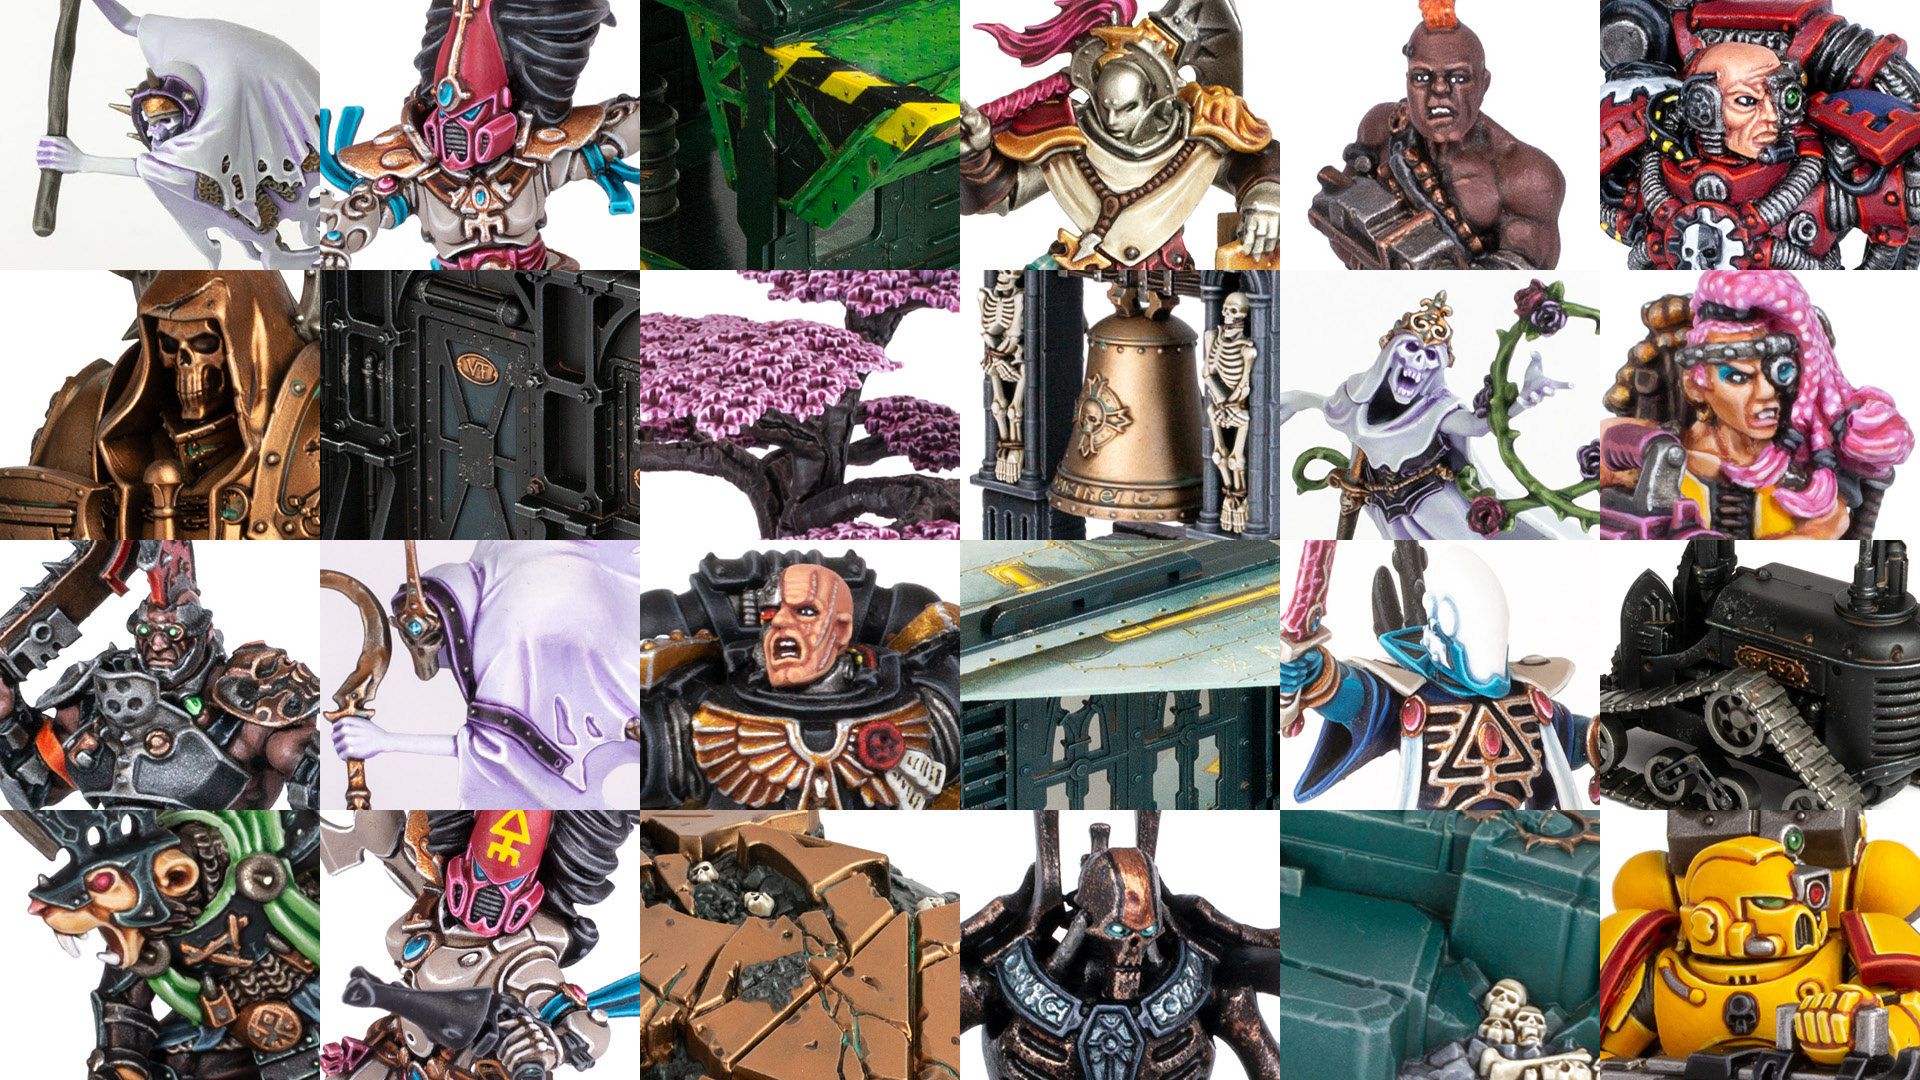 A mosaic of Stahly's painted models from 2020